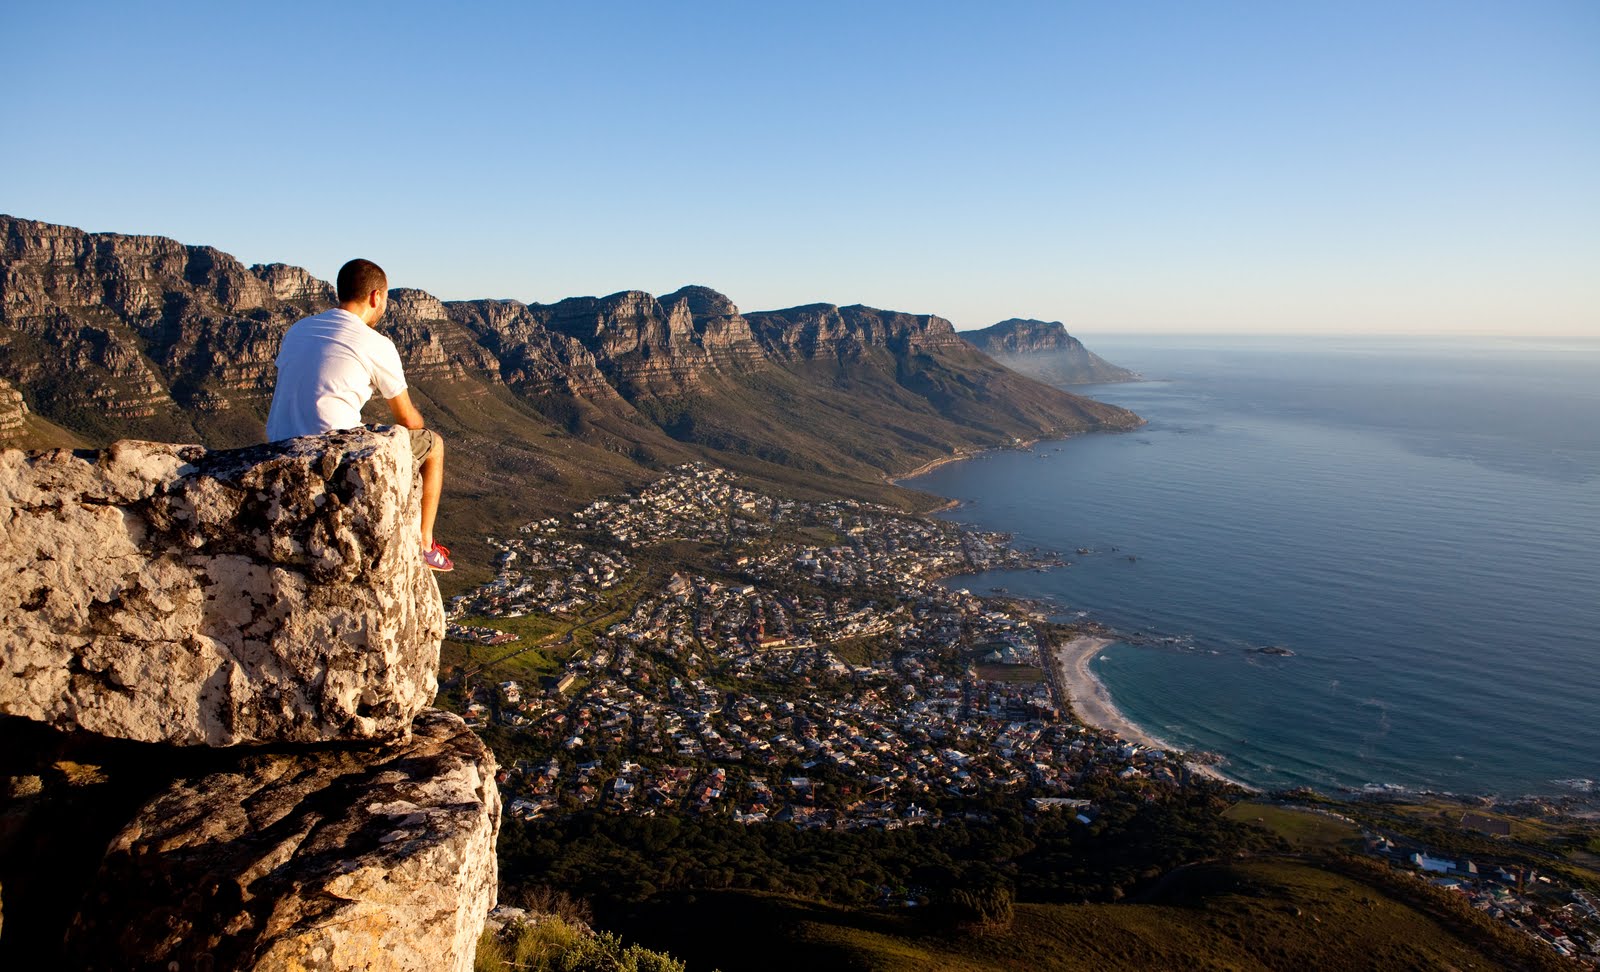 20-something in Cape Town: Best places to take a photo in Cape Town